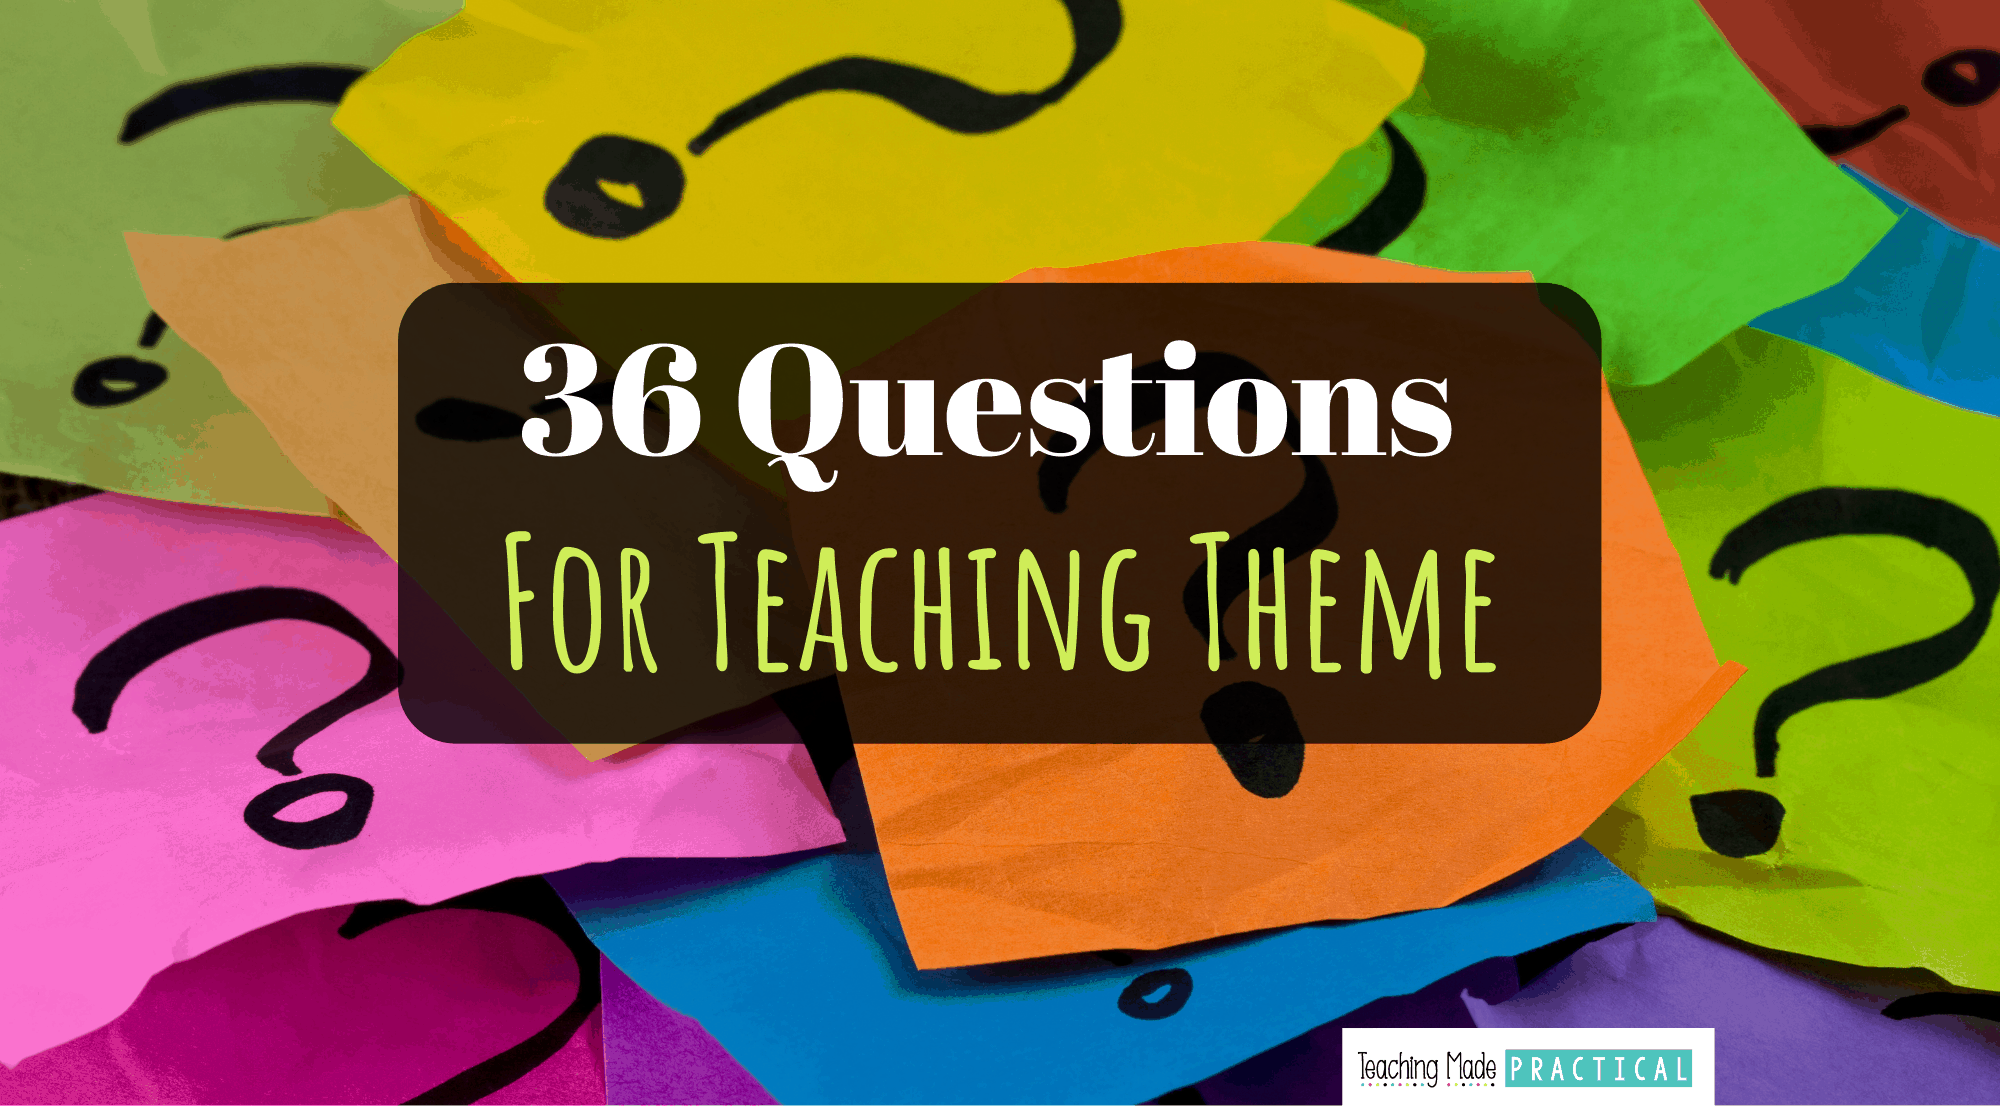 Higher Order Thinking Questions (Revised Bloom's Taxonomy questions) for teaching theme to 3rd grade, 4th grade, and 5th grade students